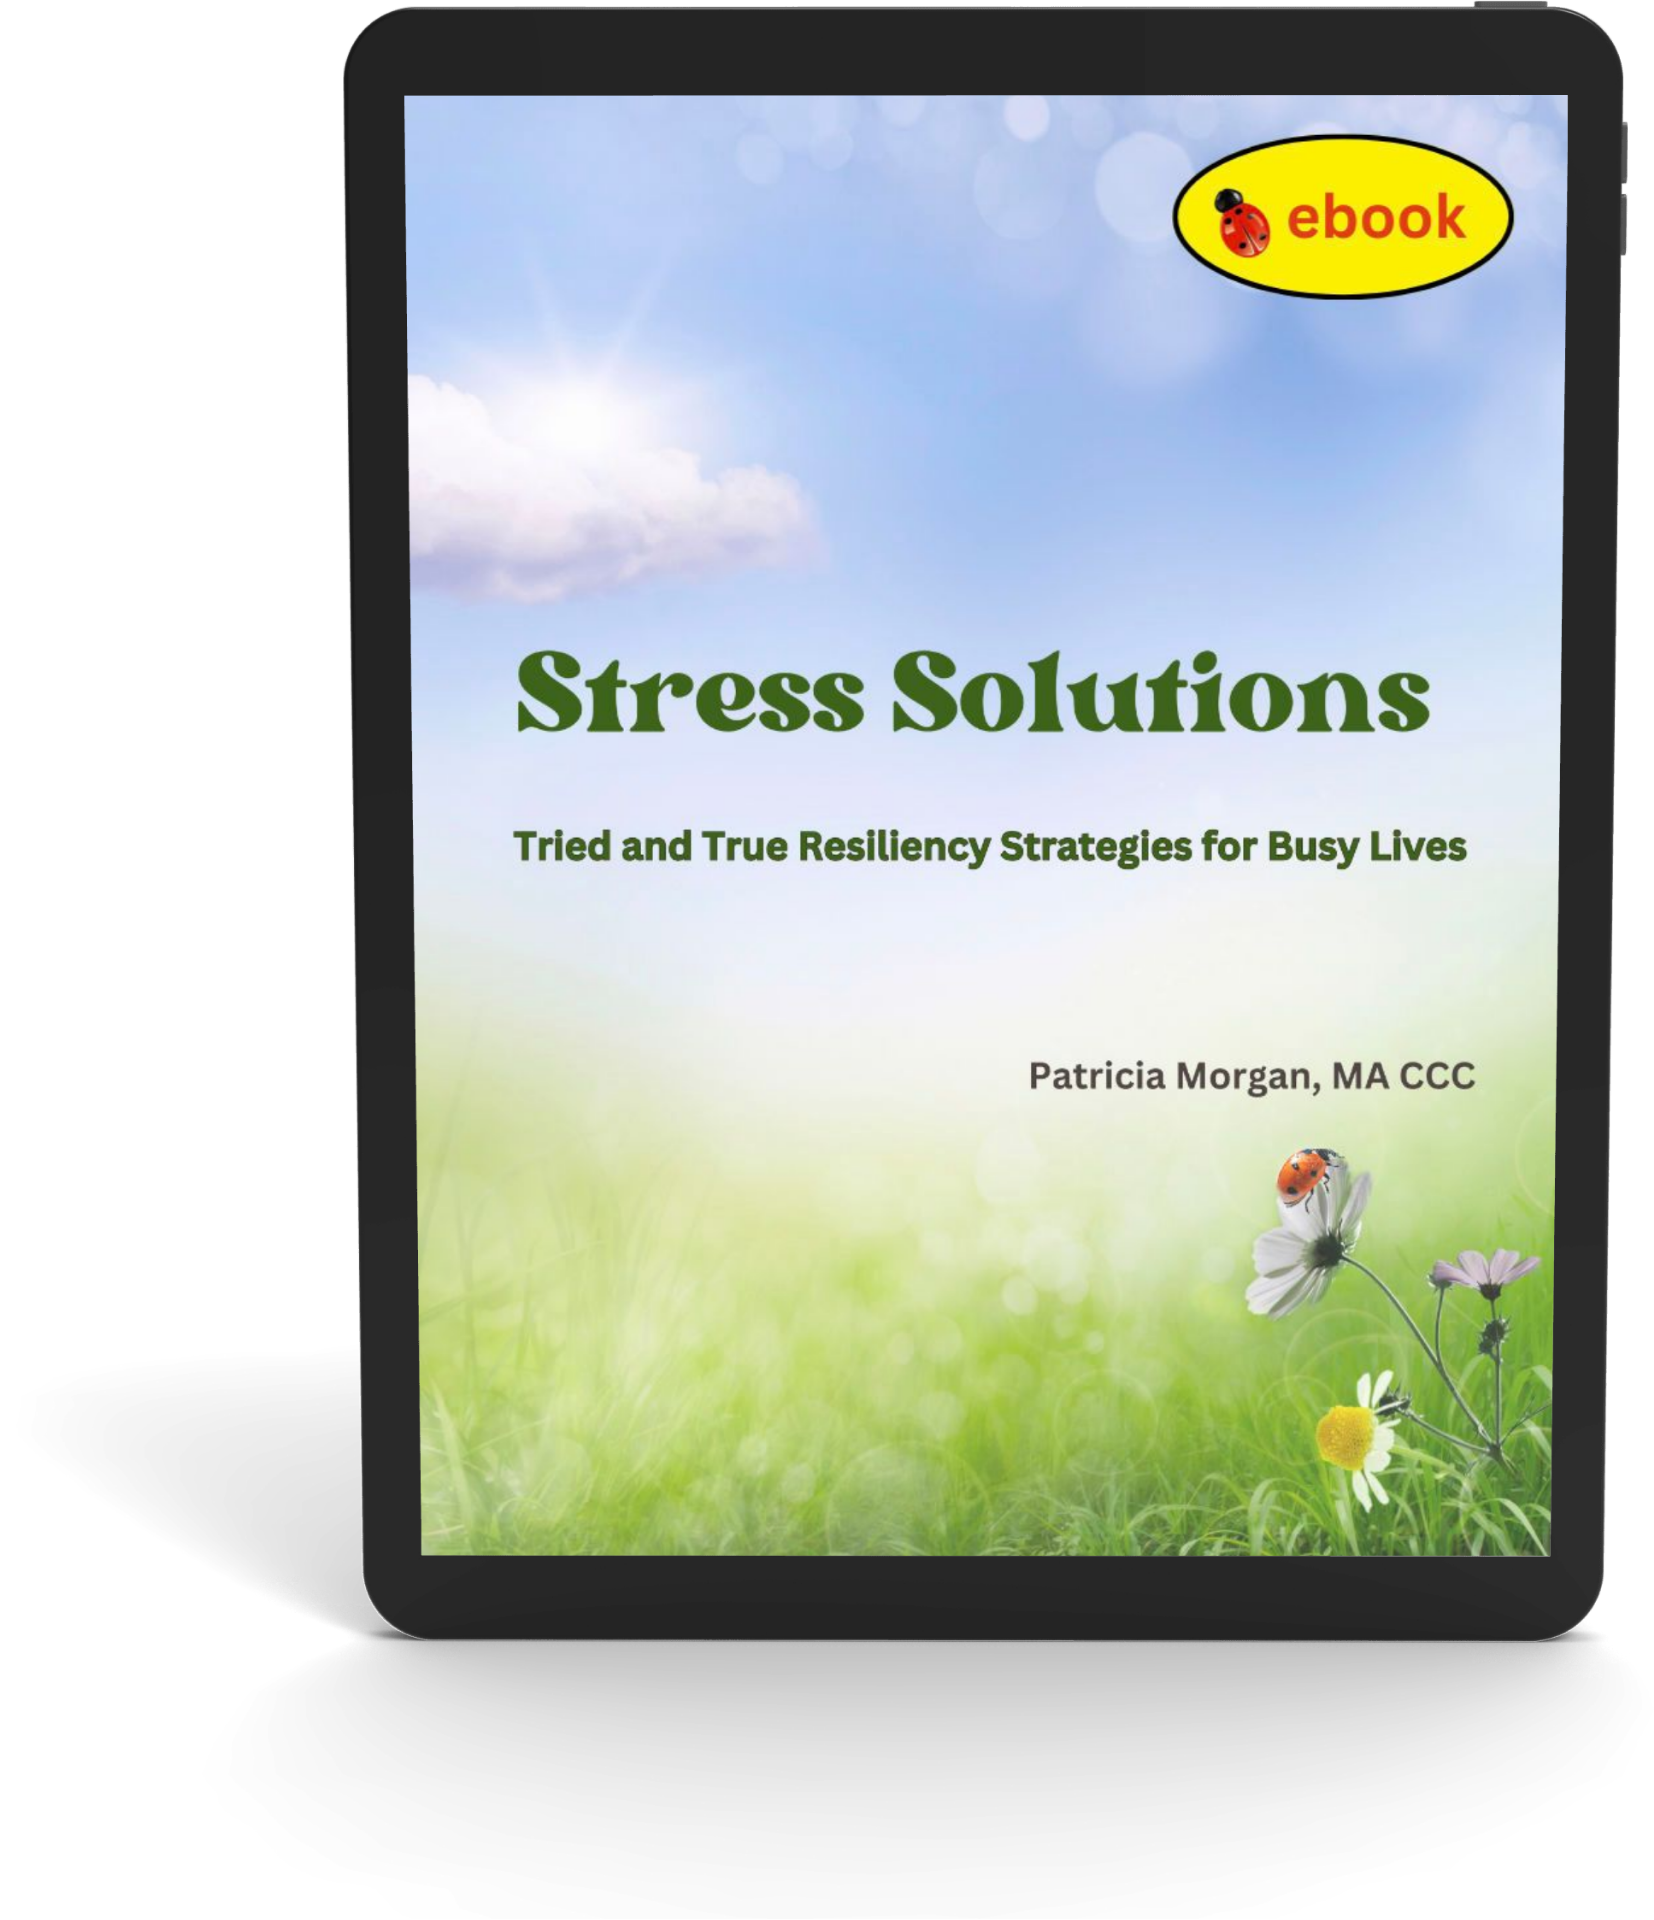 Stress Solutions: Tried and True Resiliency Strategies for Busy Lives E-Book